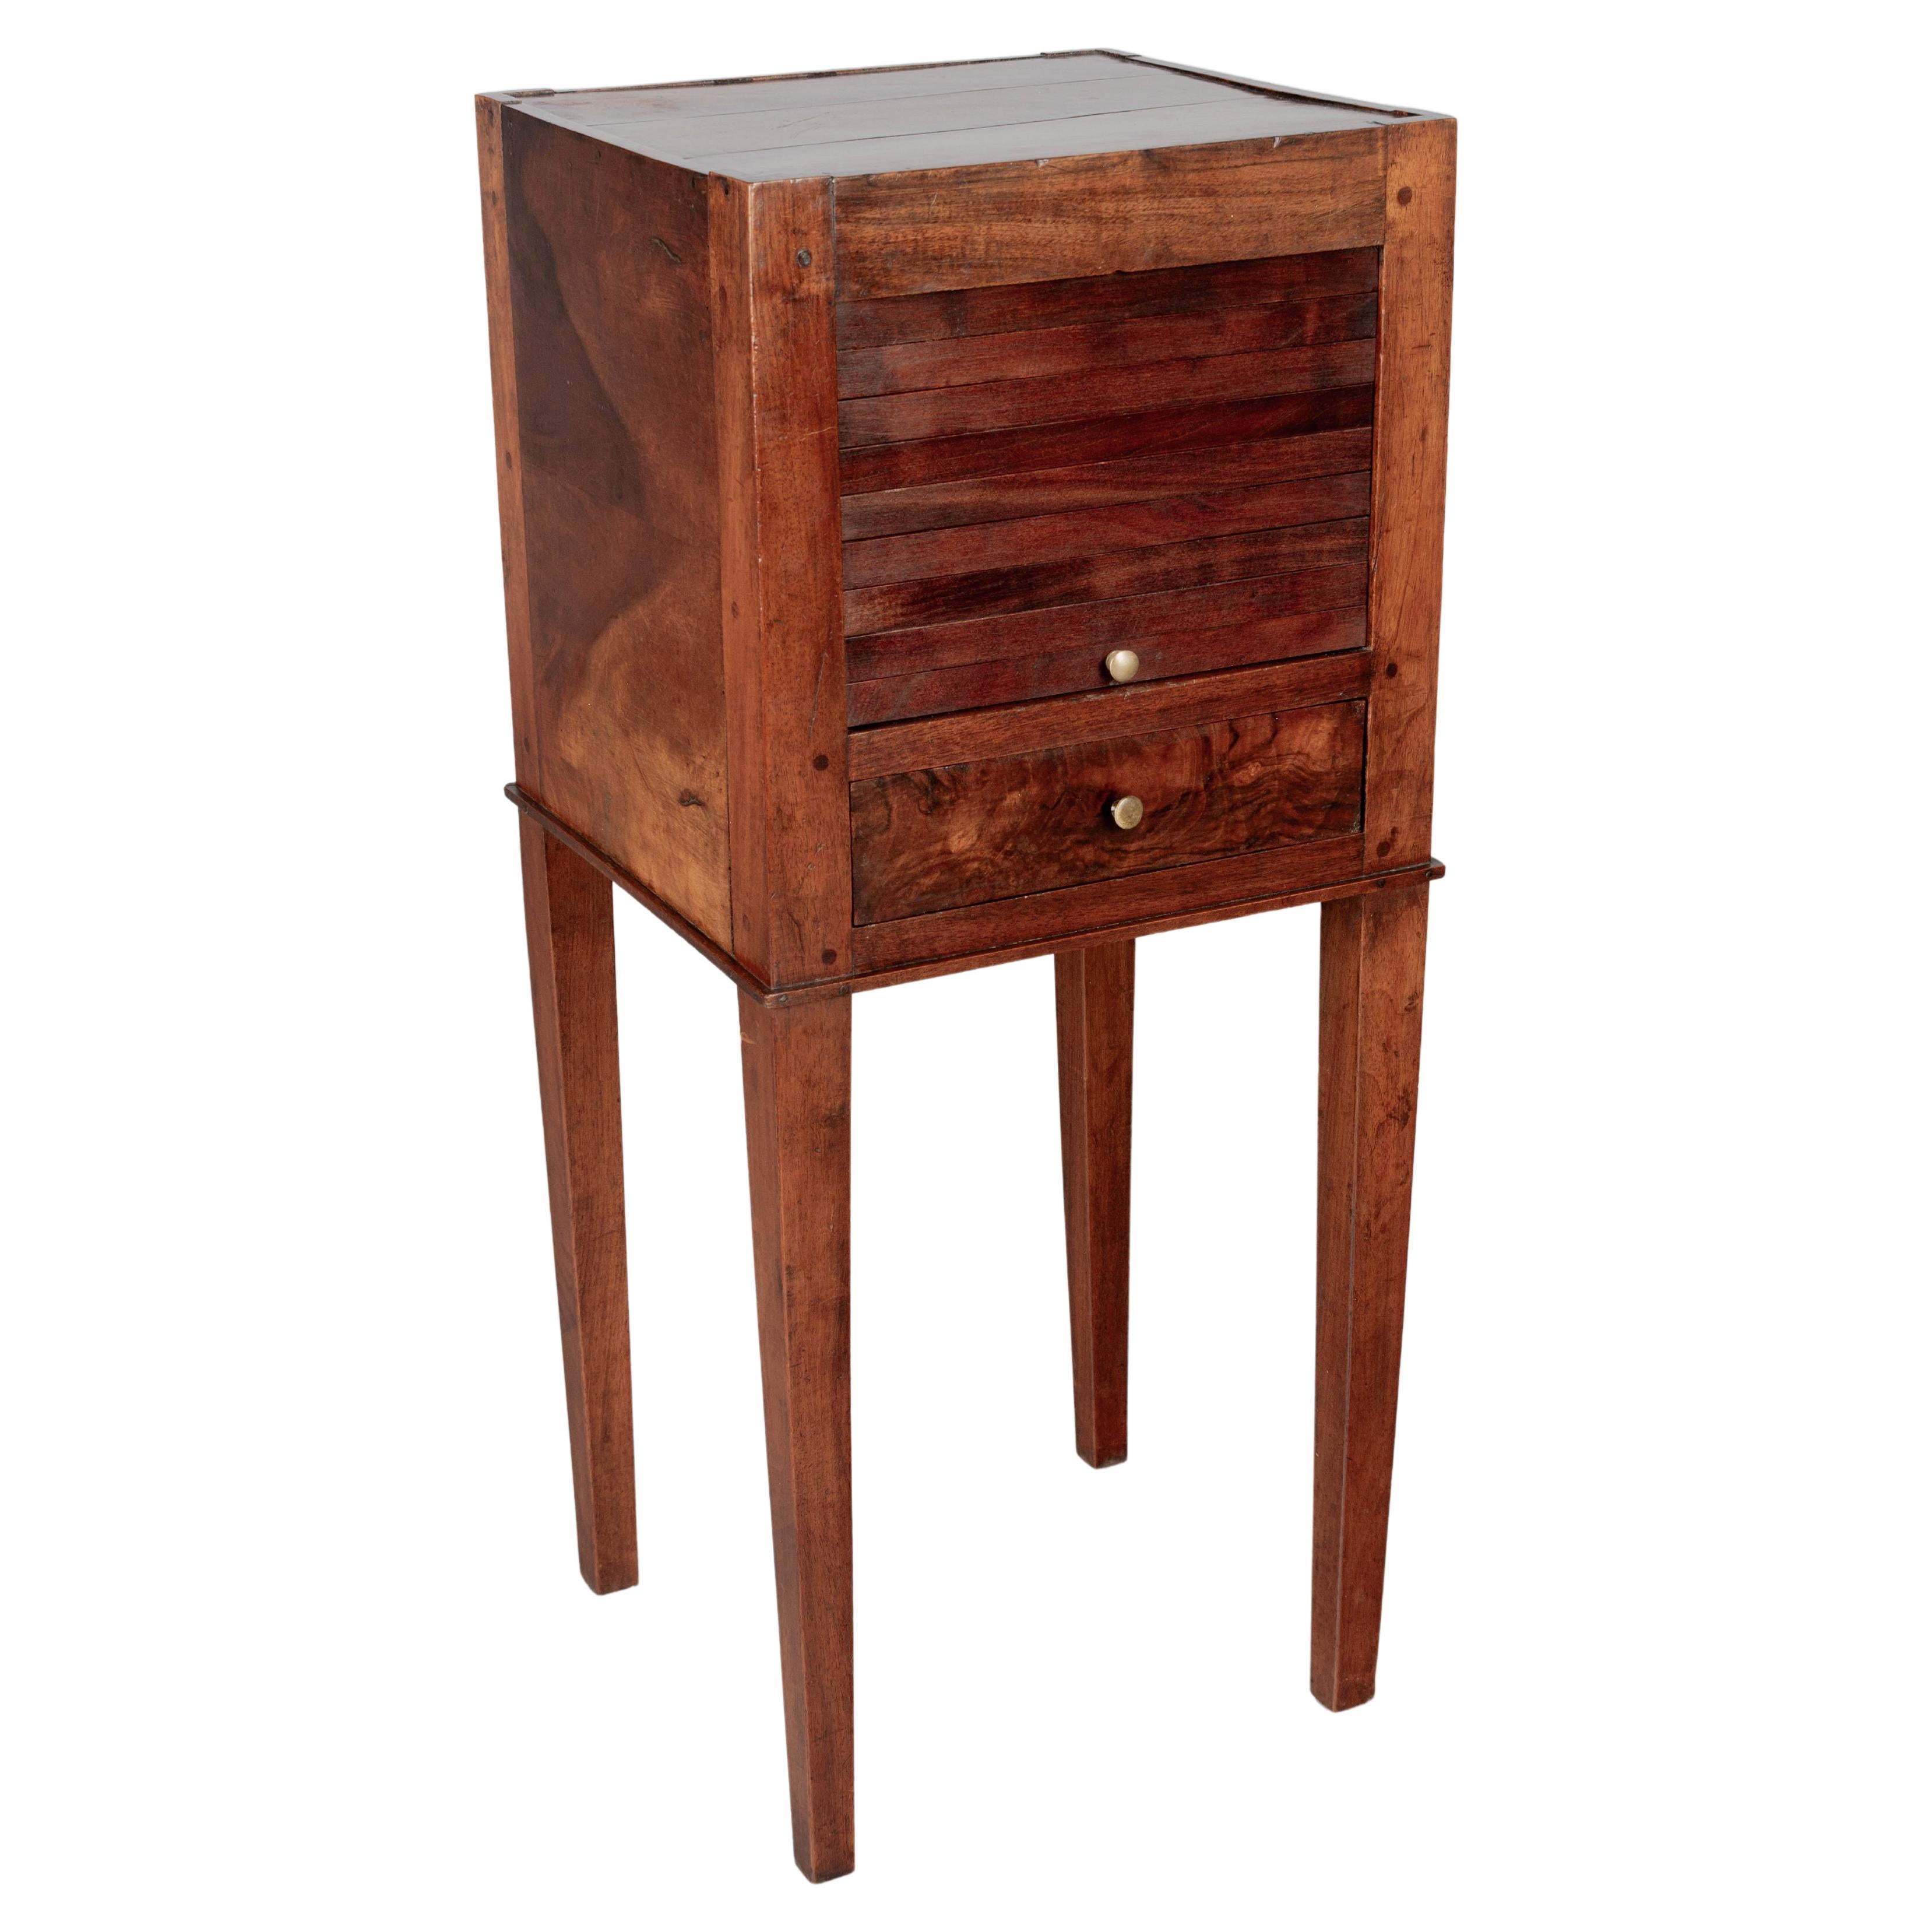 19th Century French Walnut Side Table with Tambour Door